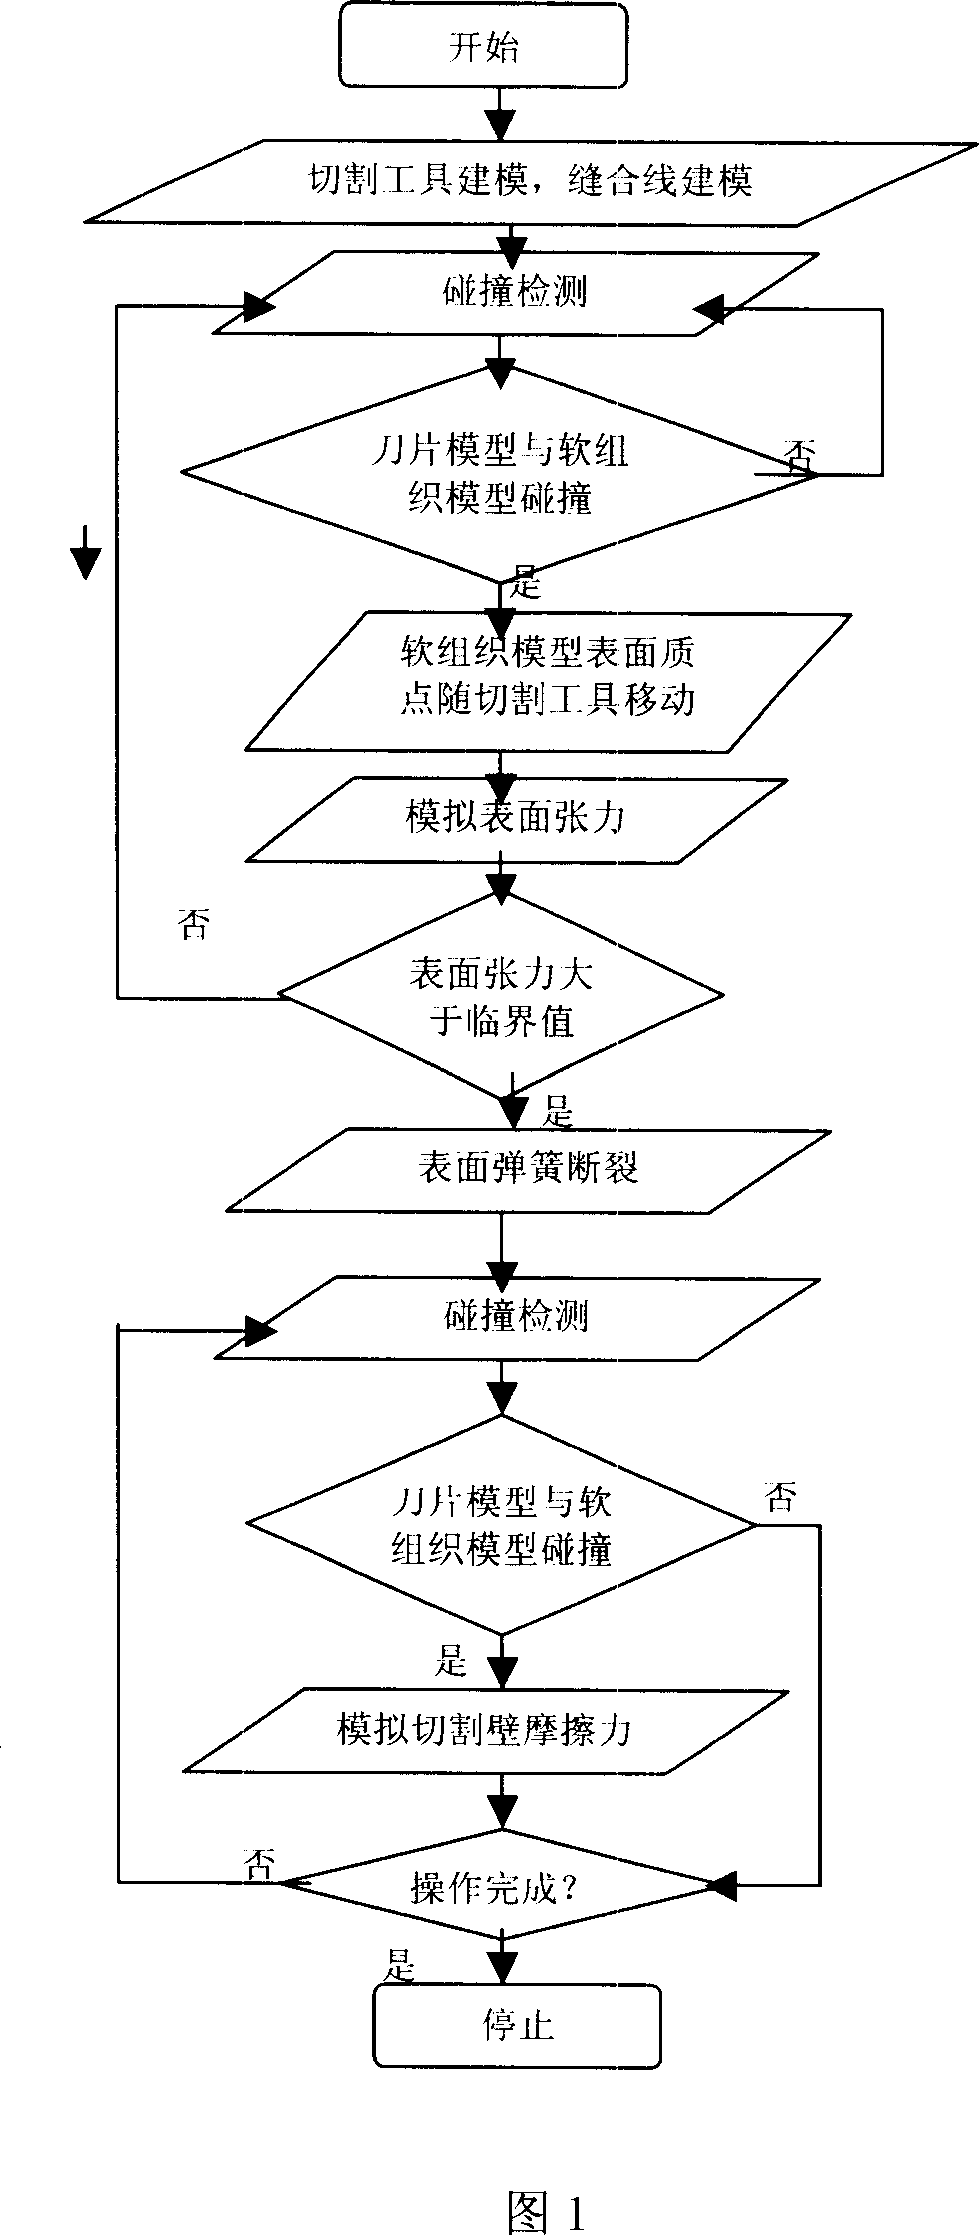 Computerized cutting and stitching analogy method based on stress analysis and deformation